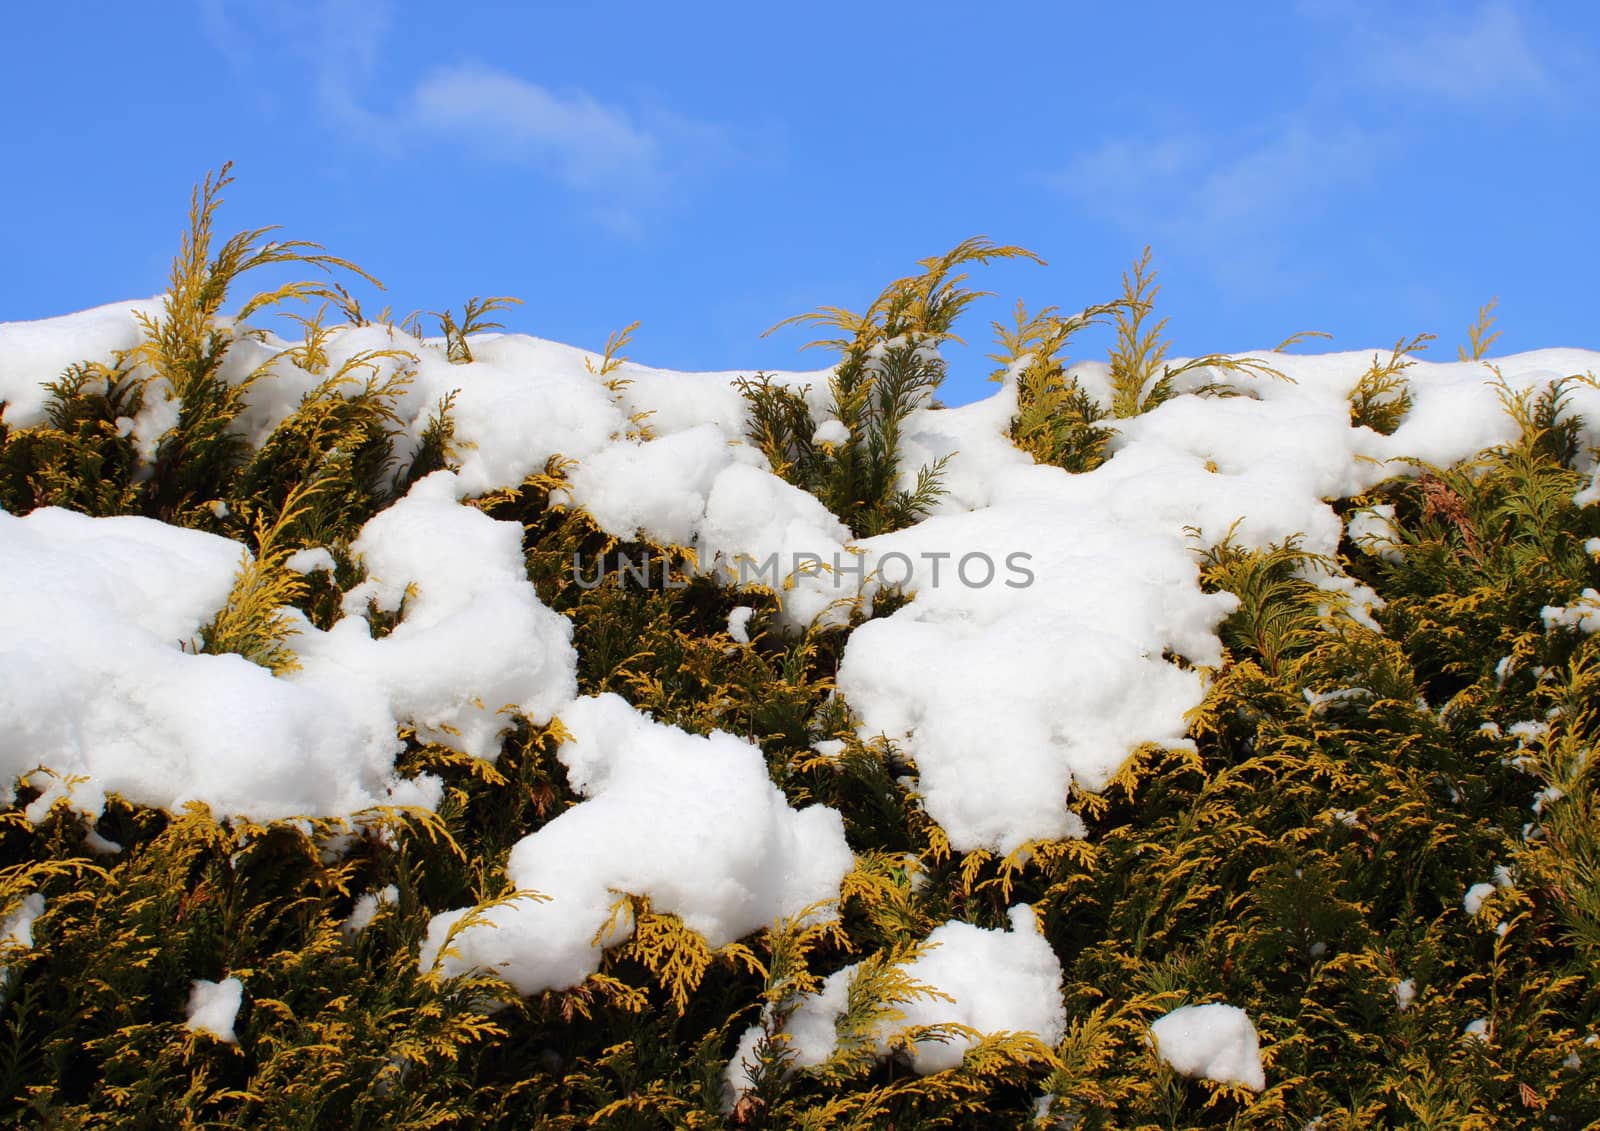 Evergreen thuja hedge background with snow and sky